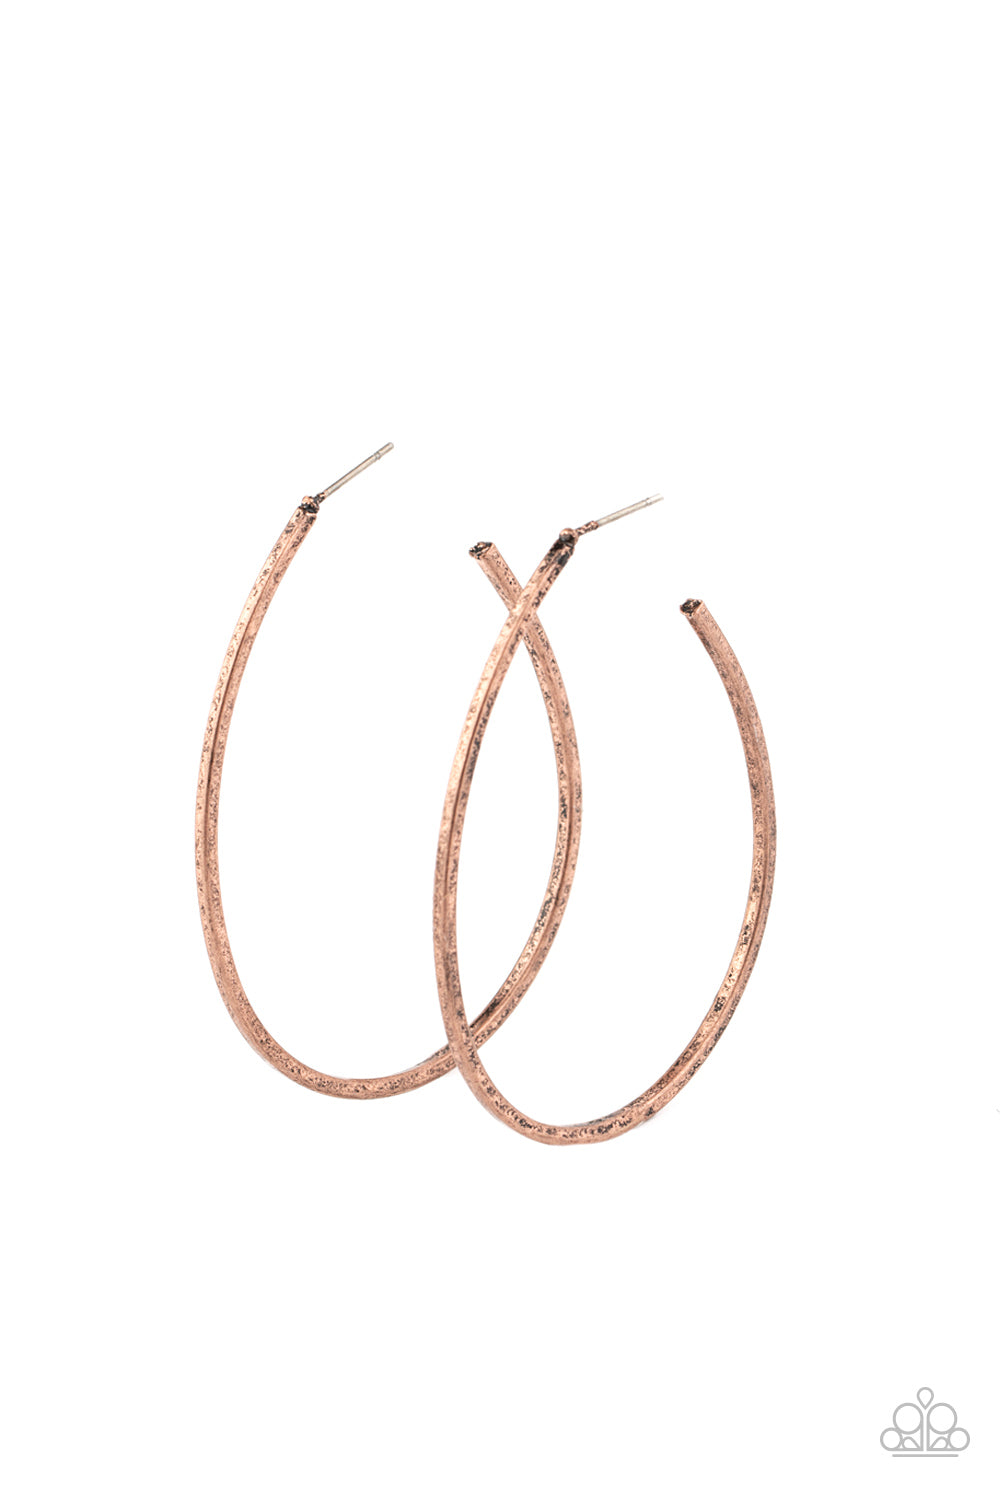 Paparazzi Accessories - Cool Curves - Copper Earrings - Alies Bling Bar